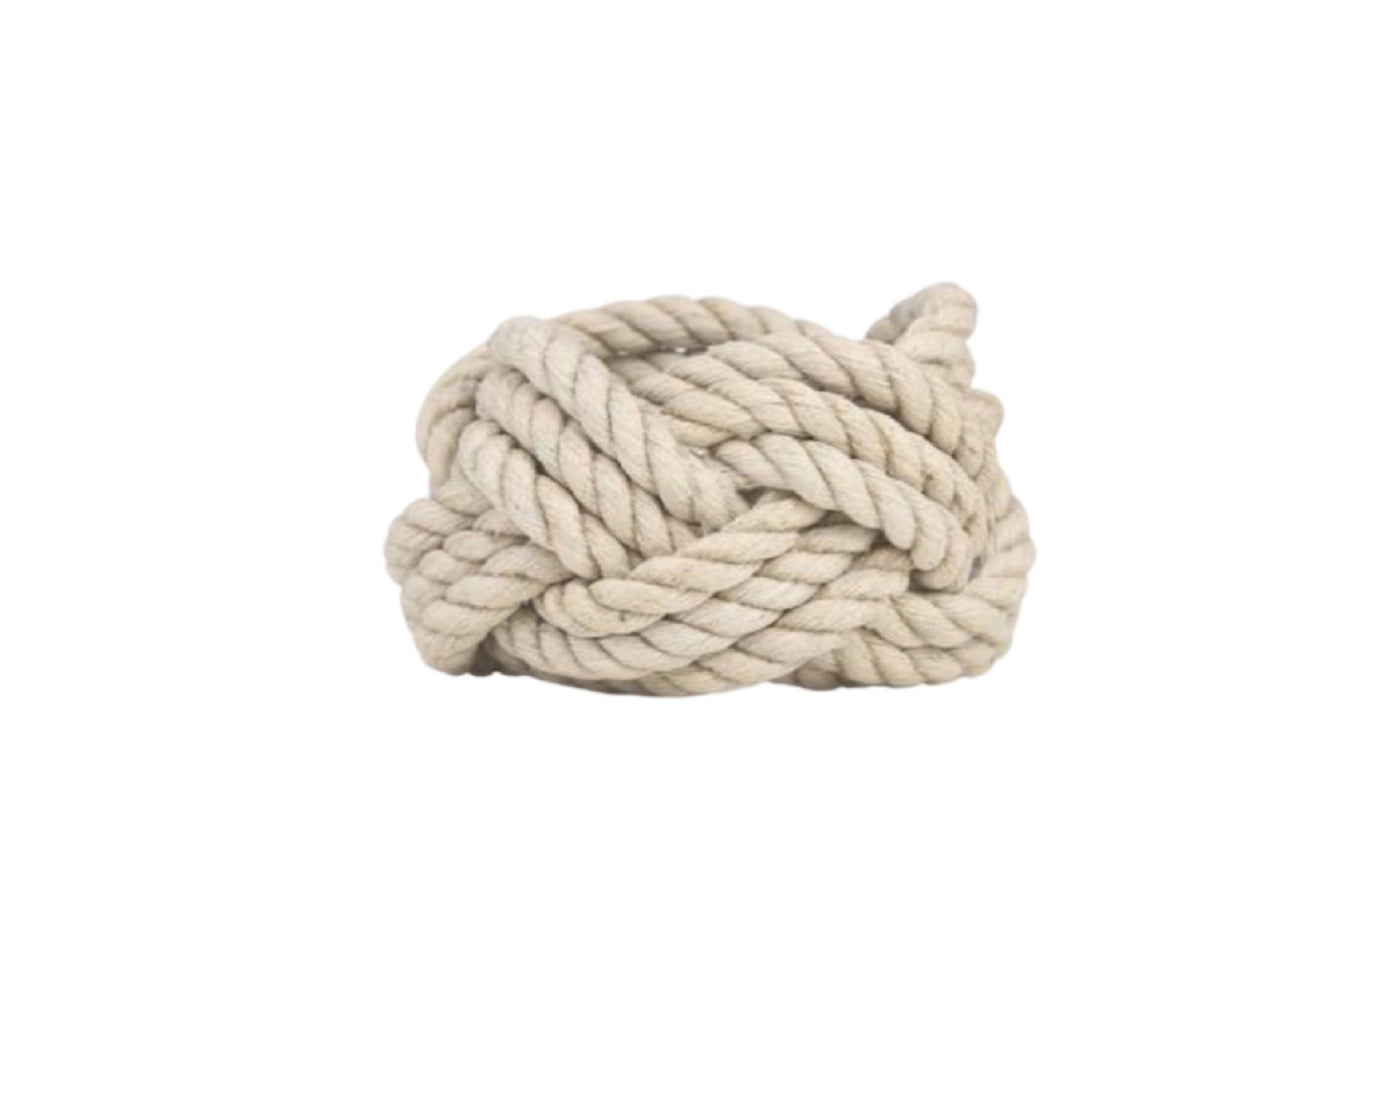 Knotted Rope Napkin Ring in Natural